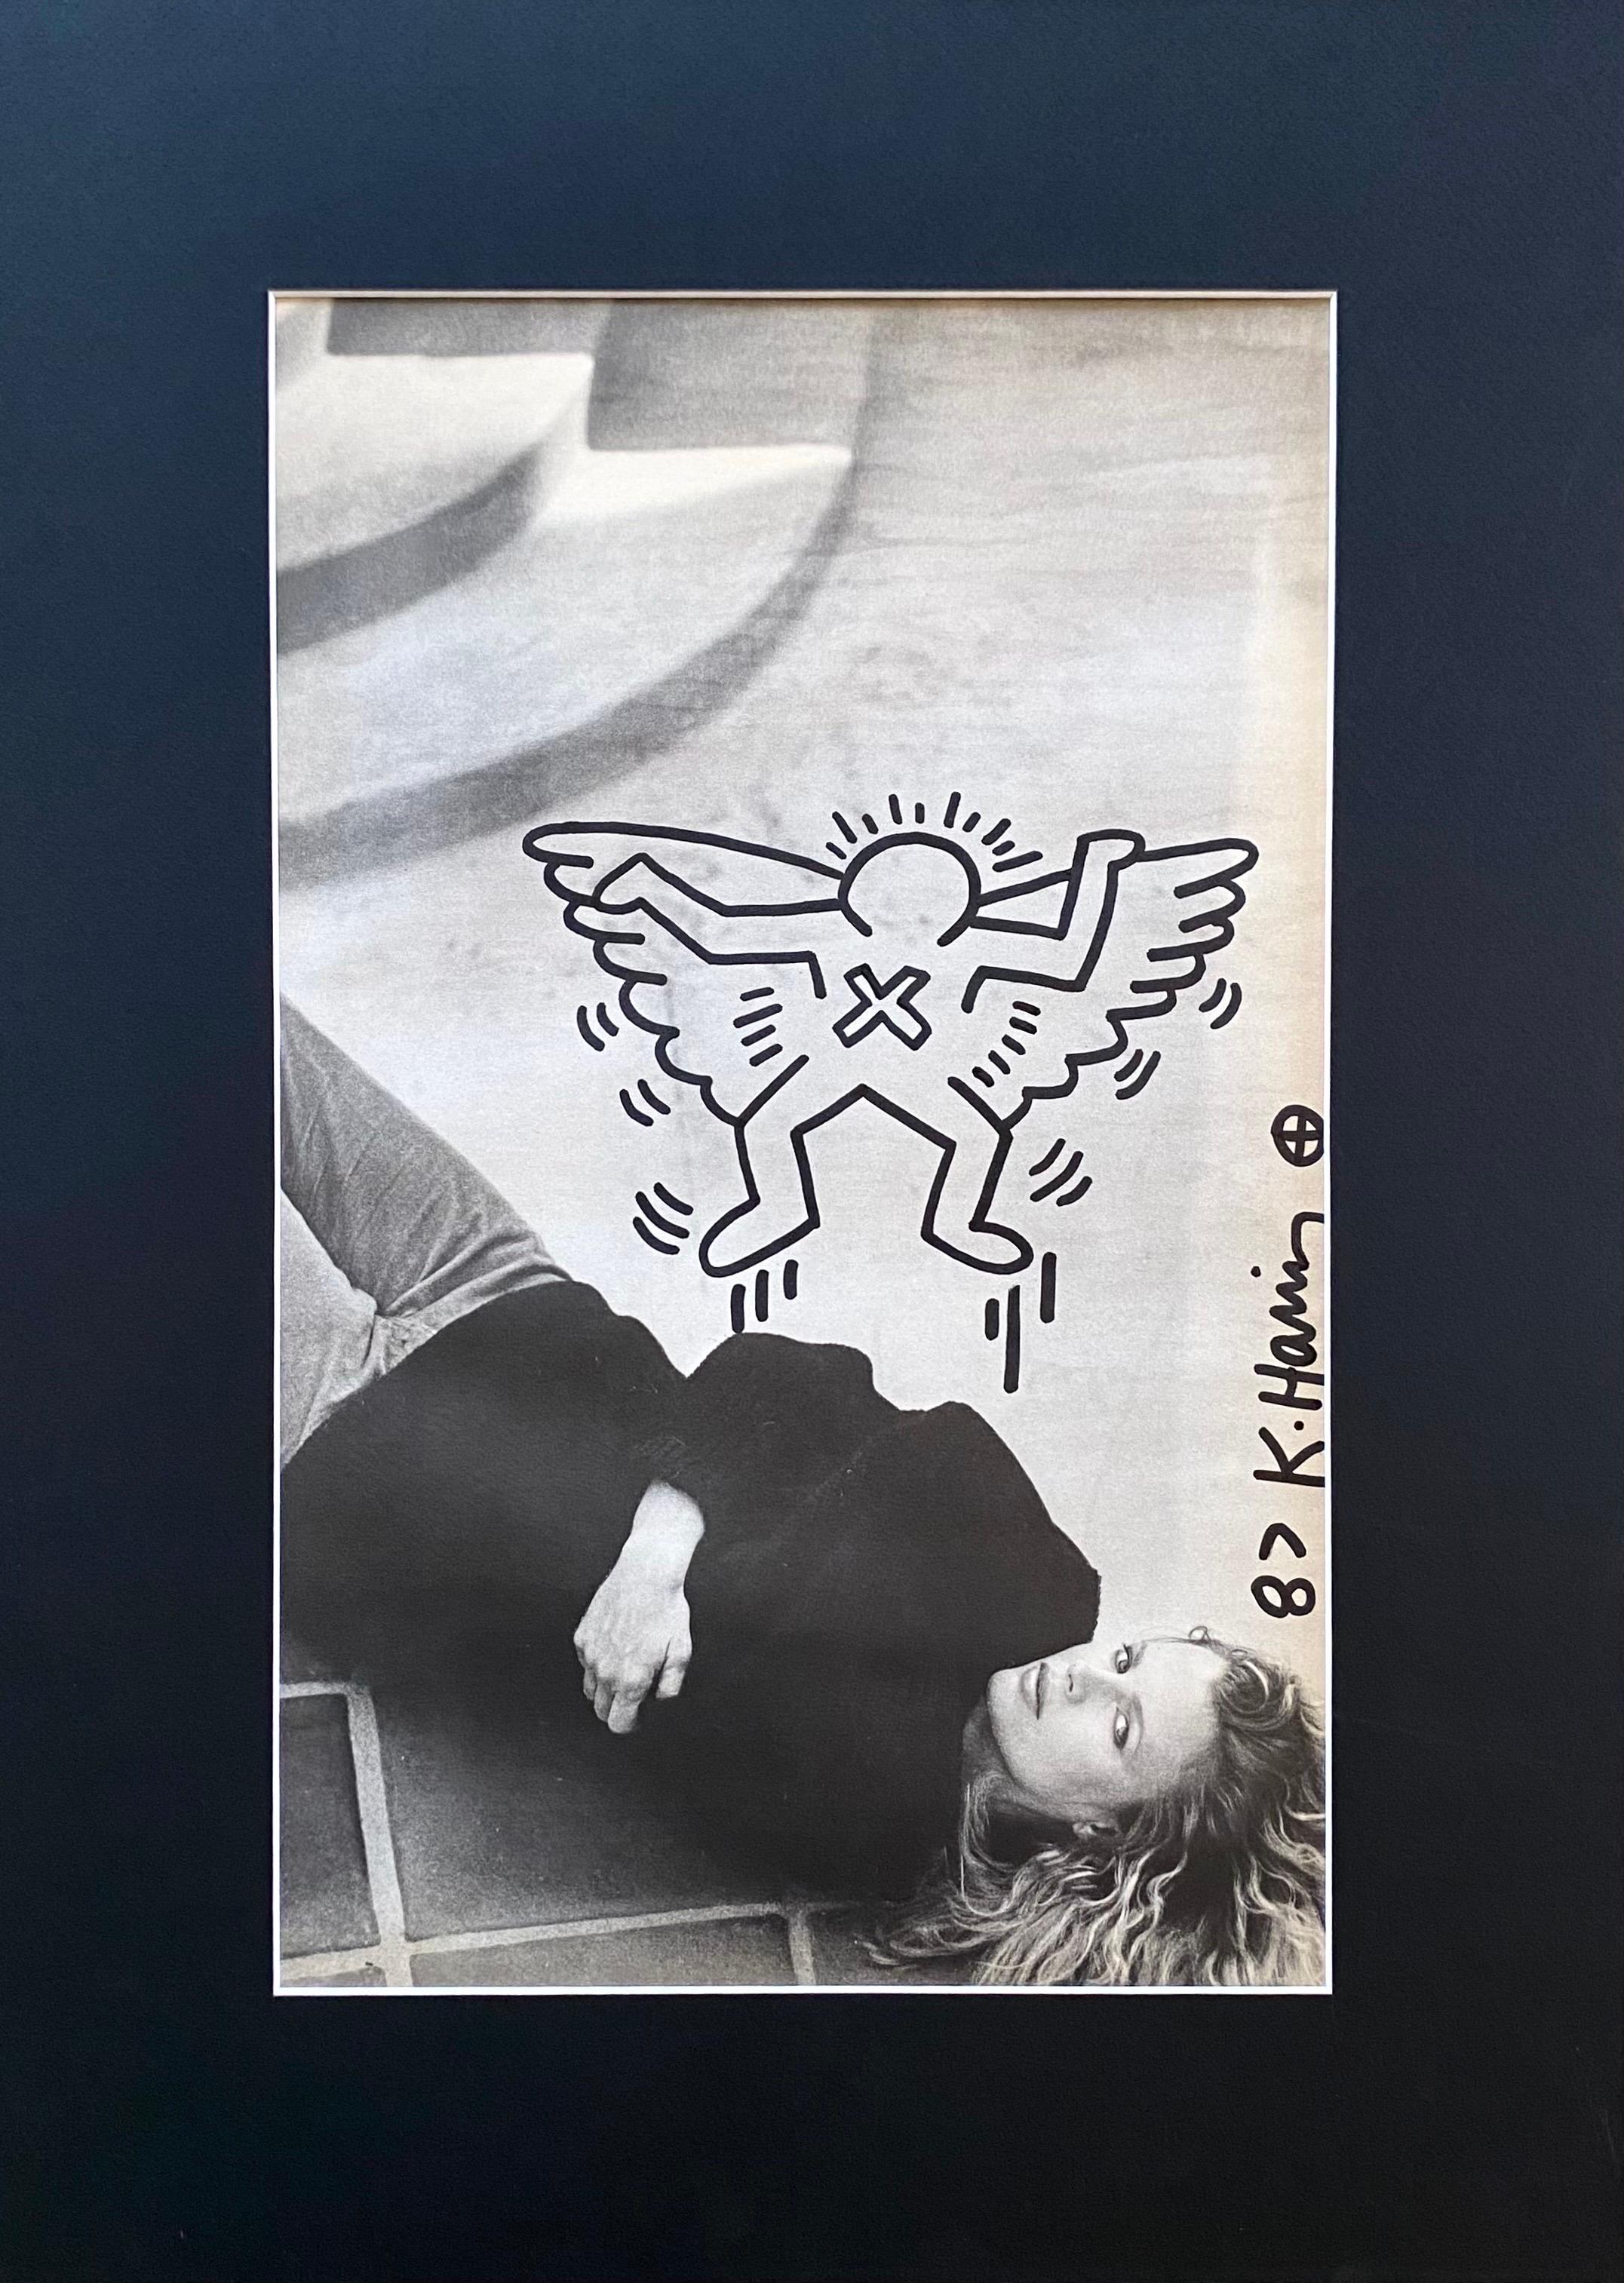 Unique piece.
Rare drawing - Keith Haring - on a magazine page representing the American actress Kim Basinger. The drawing appears on the back of the page, which features a second photo of Kim Basinger.
The motif represents one of Keith Haring's